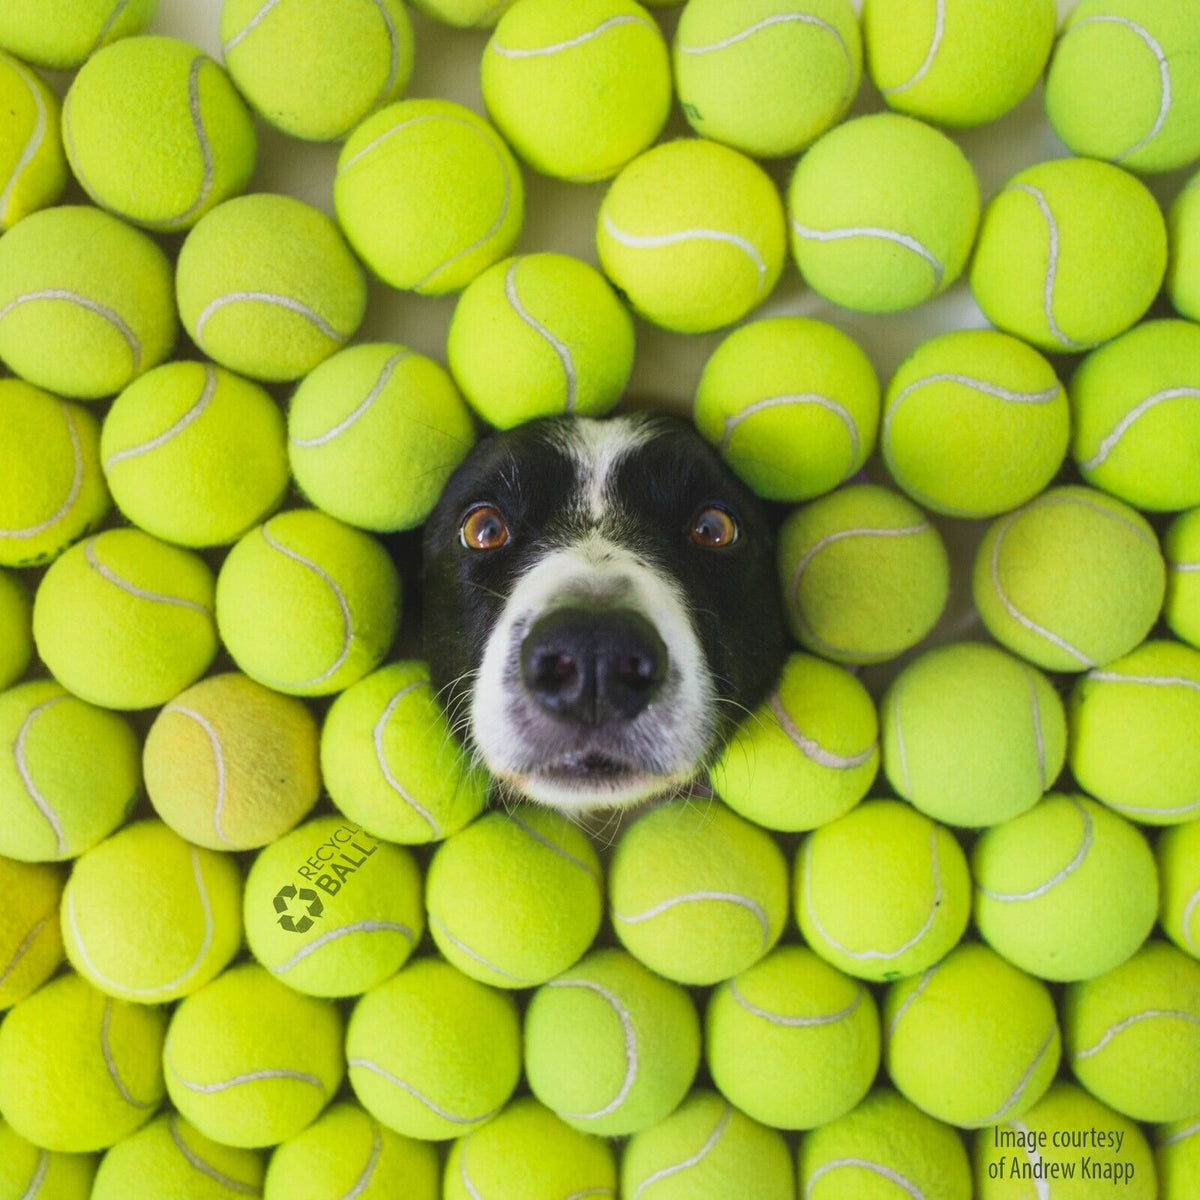 25 used tennis balls   Grade A   FREE FAST SHIP   Support our Non Profit Mission 